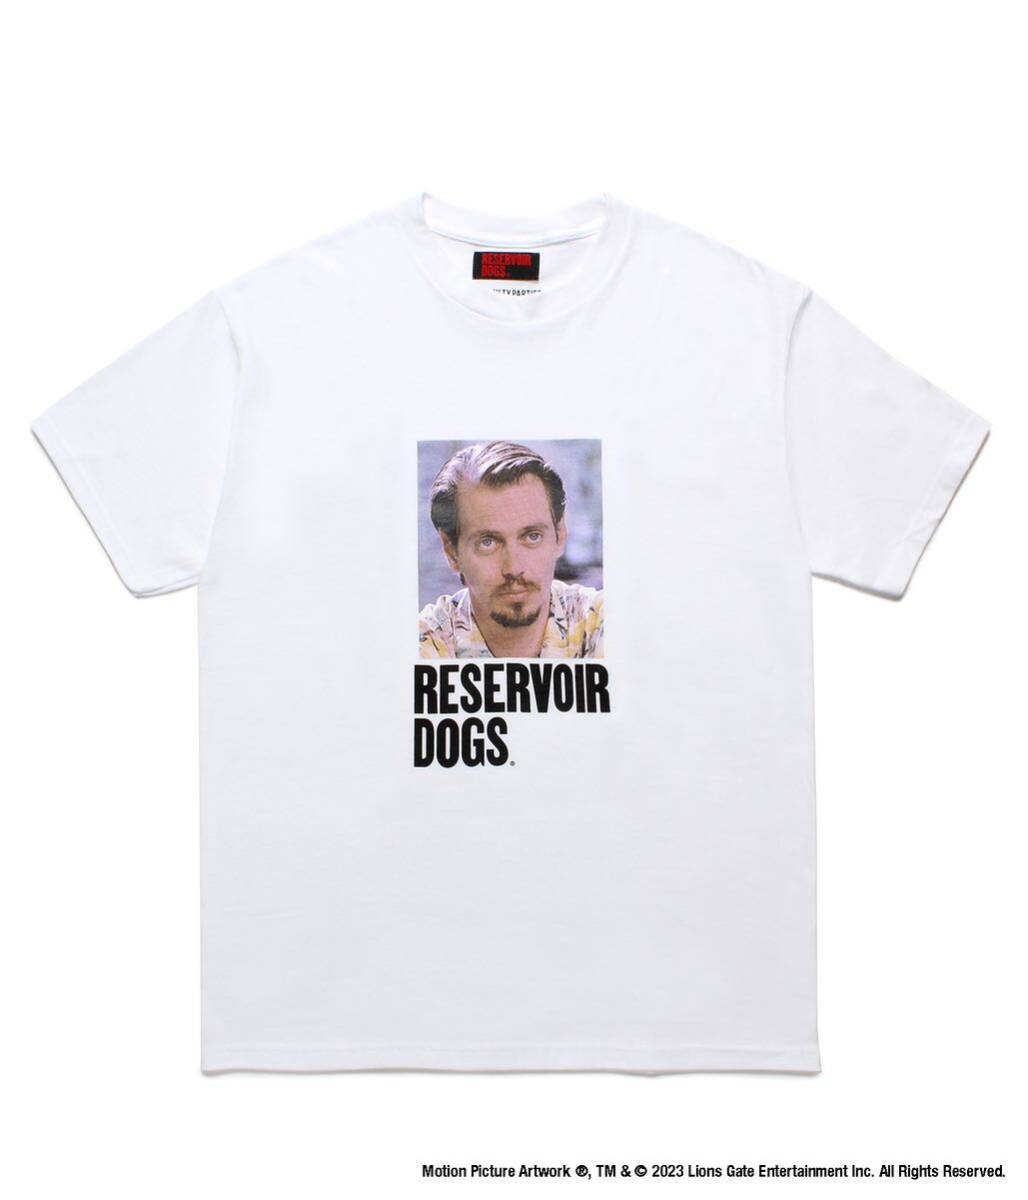 WACKO MARIA 24SS RESERVOIR DOGS Tシャツ ミスターピンク 白 L ワコマリア_画像1